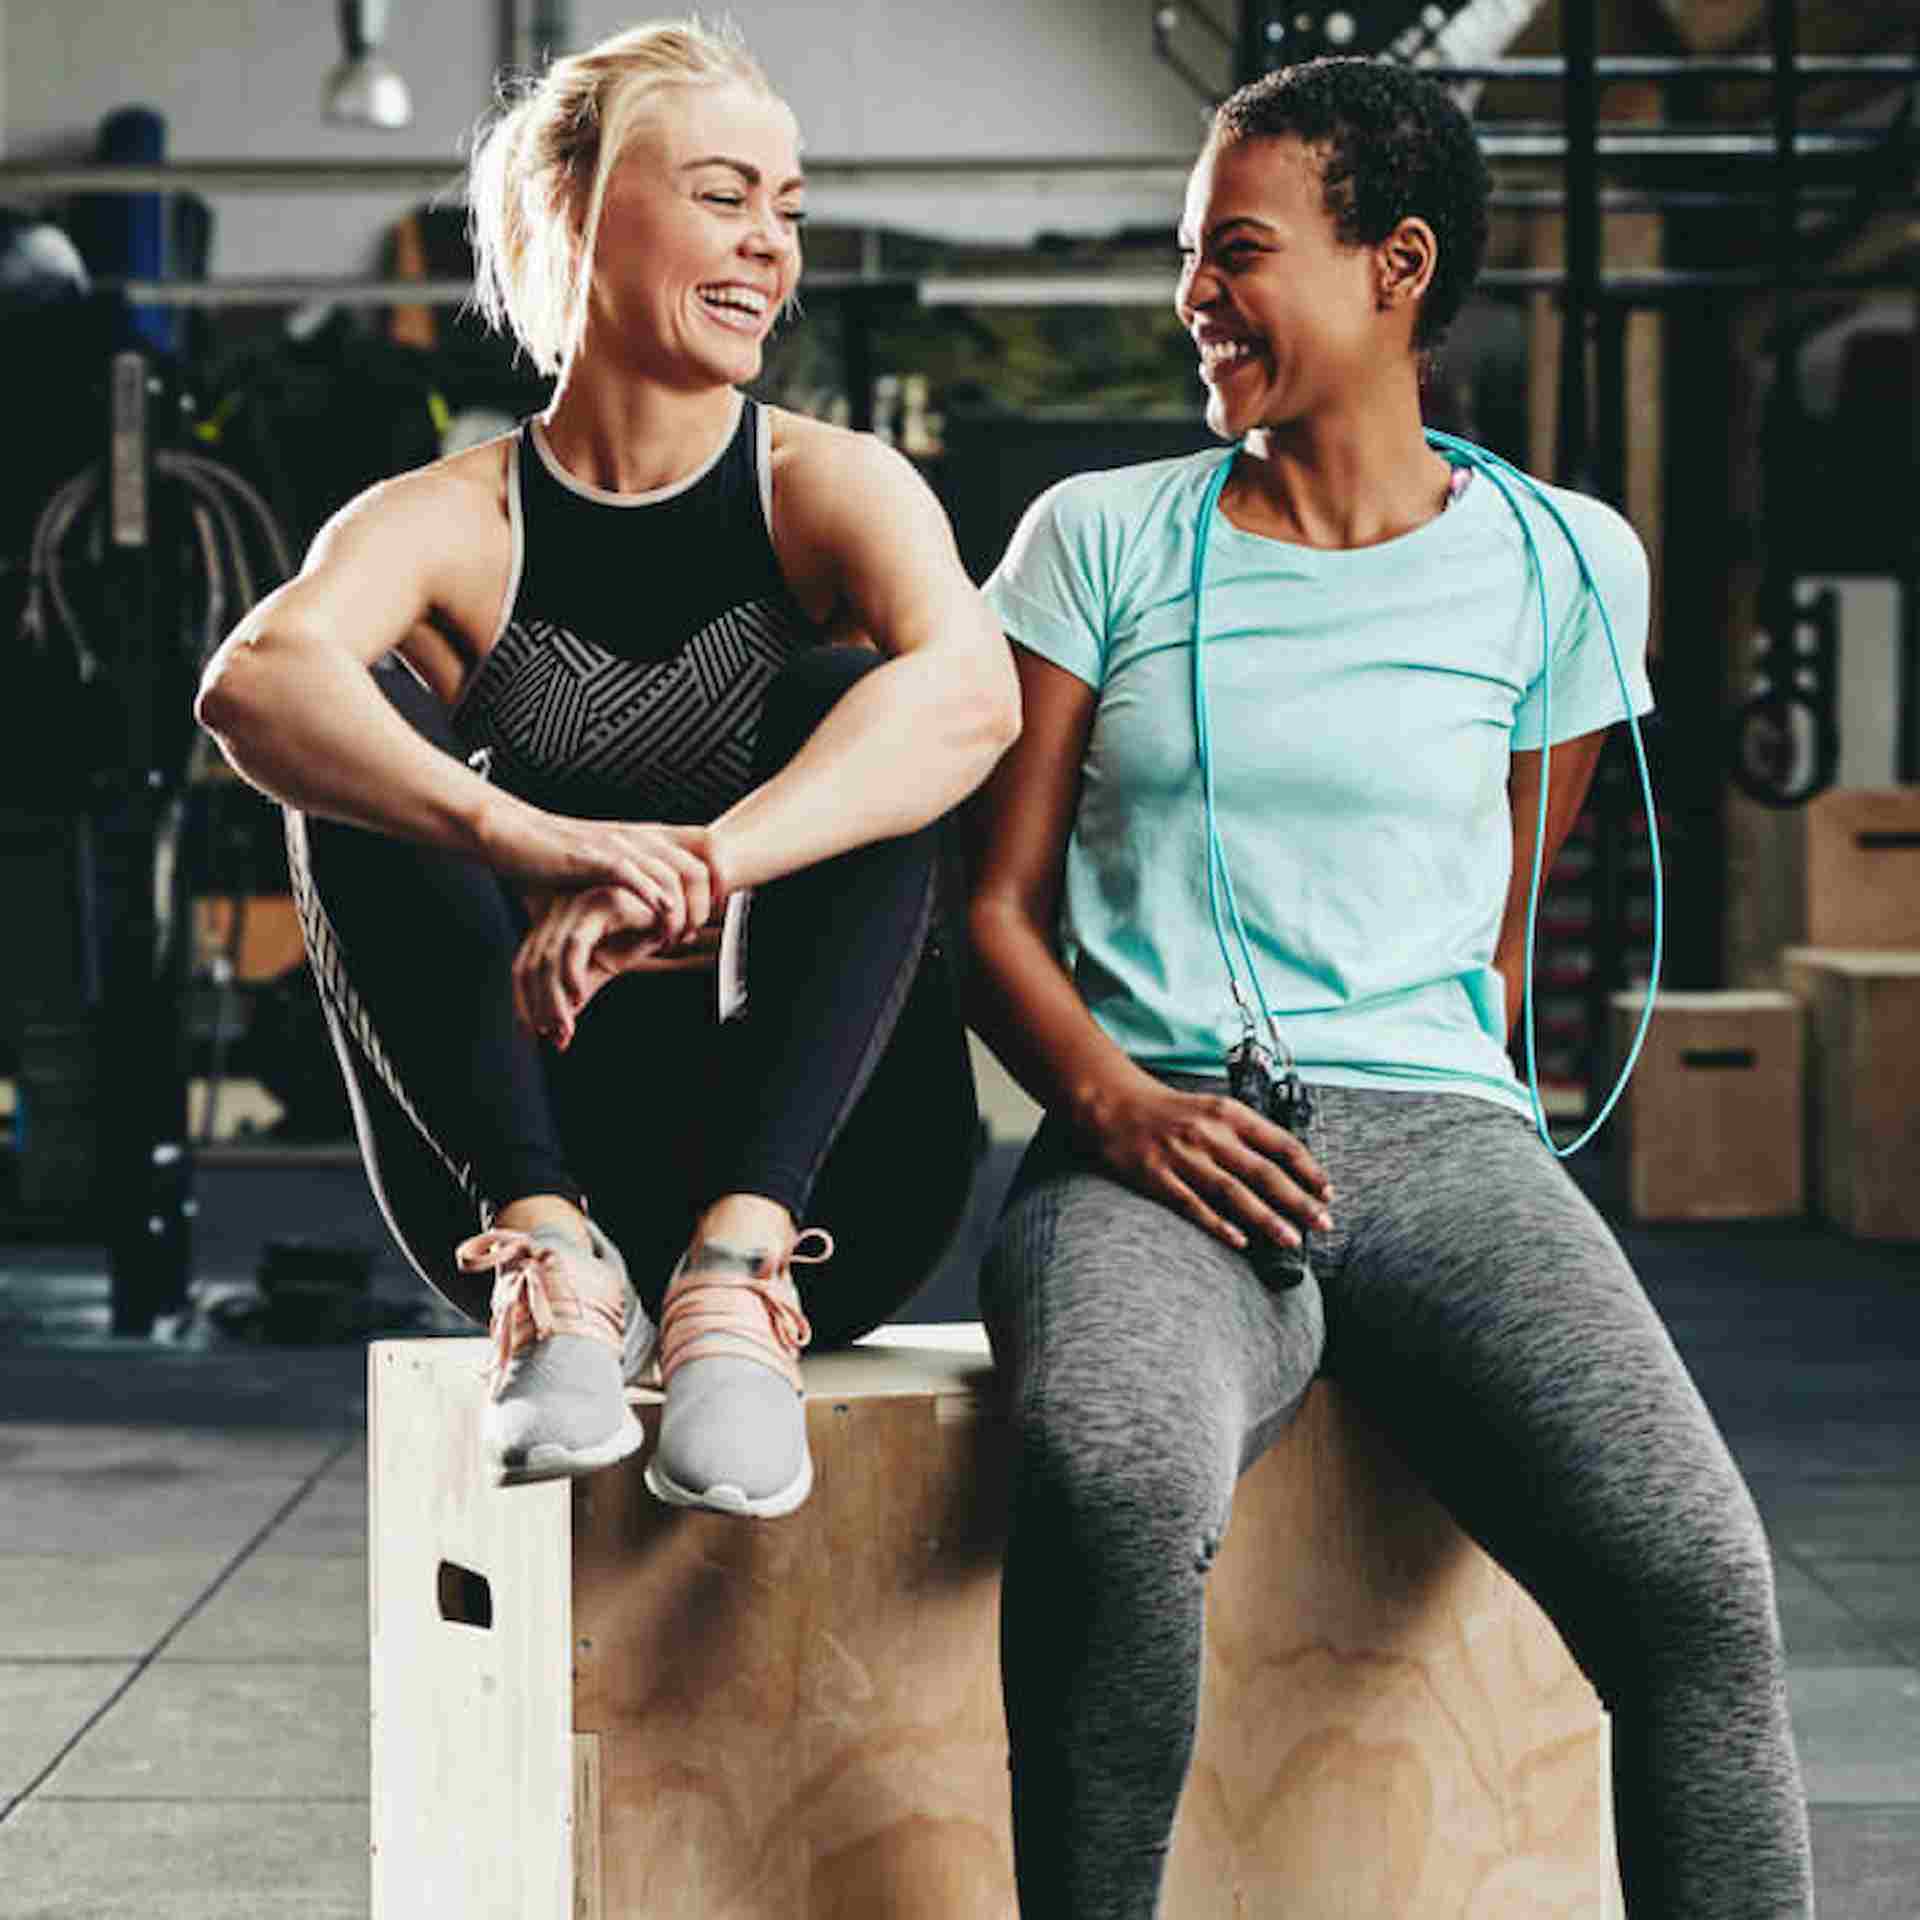 Two females sitting on a box in the gym laughing